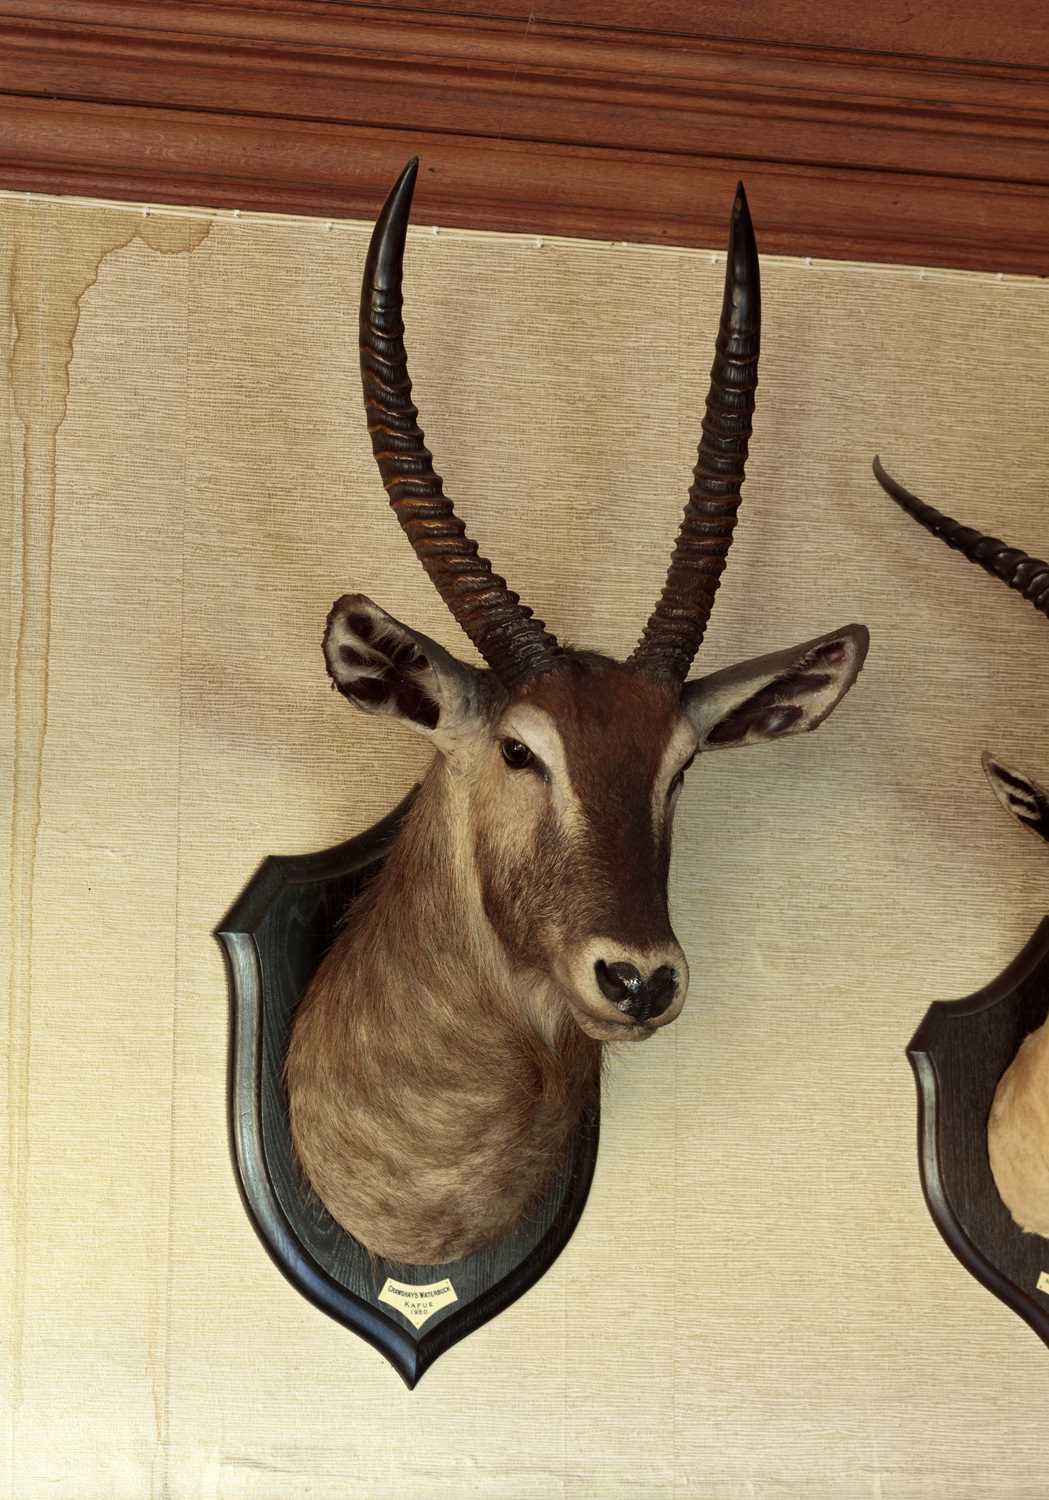 Taxidermy: Crayshaws or Common Waterbuck (Kobus ellipsiprymnus), dated 1920, Kafue, Zambia, by - Image 6 of 7